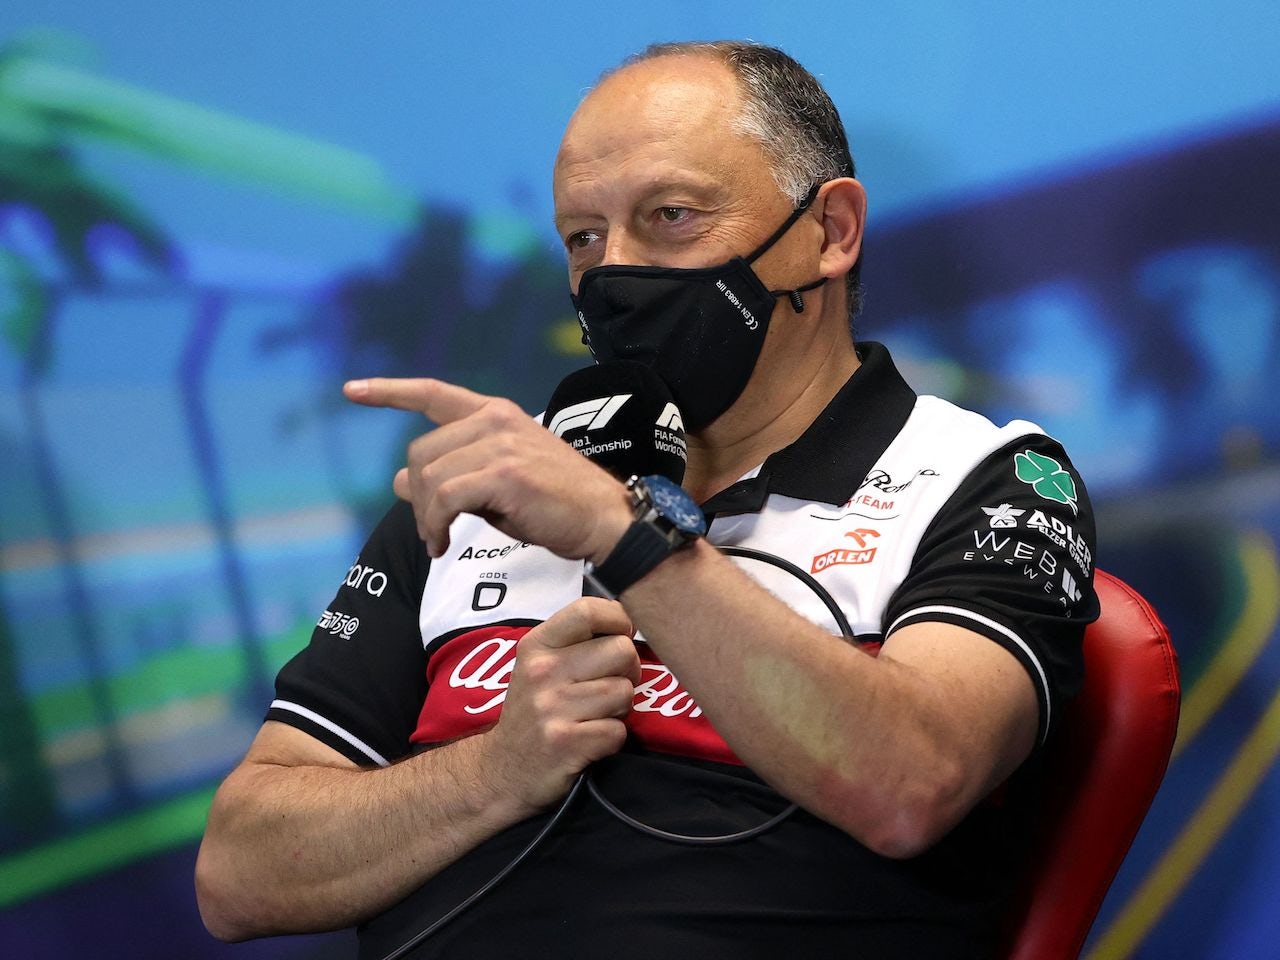 No contract talks with drivers yet - Vasseur